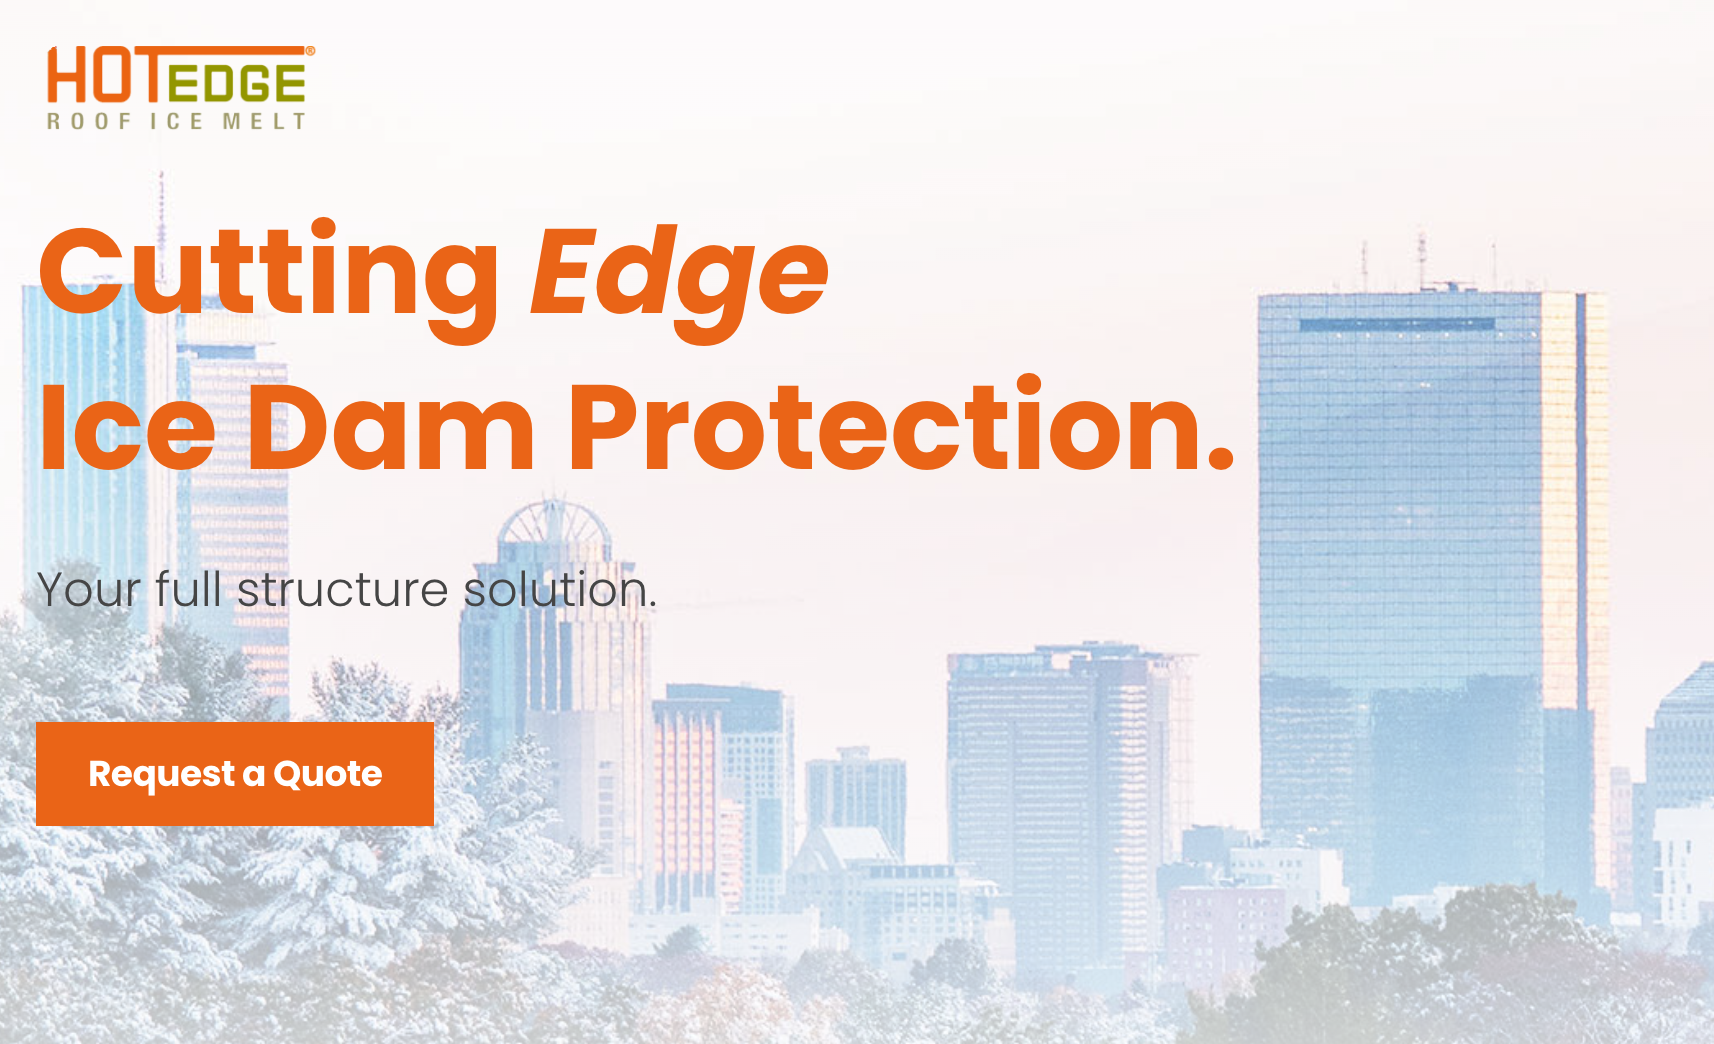 Ice dam and icicle prevention solutions in Boston, MA. Our patented roof melt technology is energy-efficient and affordable. Contact us today to talk to an expert!